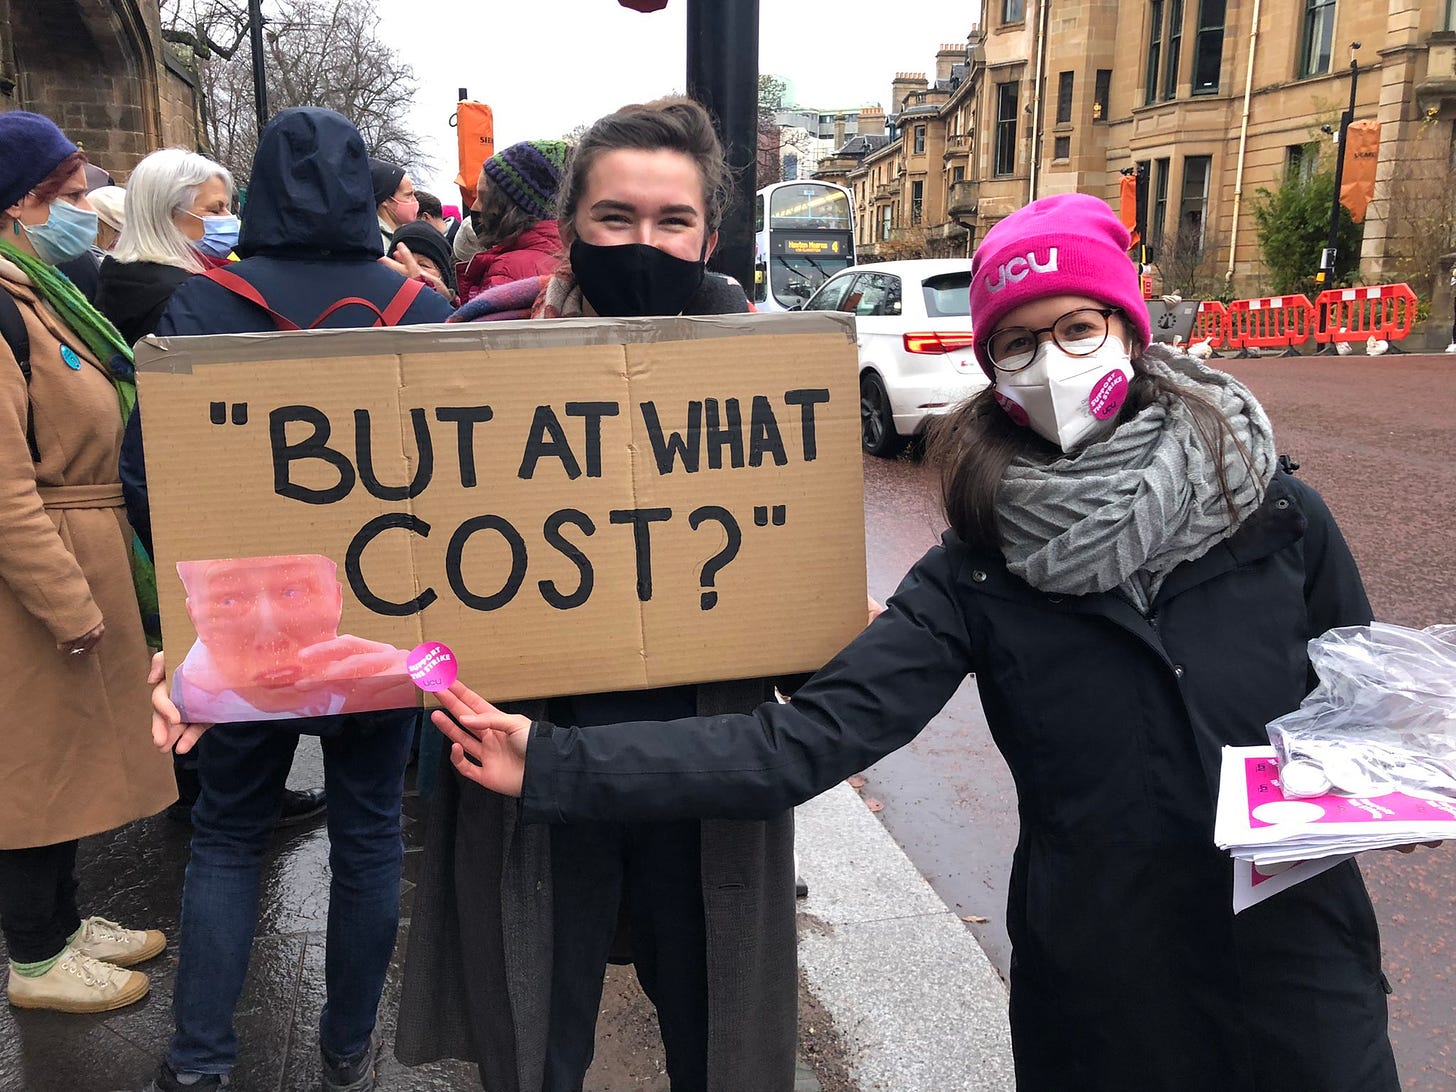 ID: A sign being held up by two protesters that says: "At what cost?"